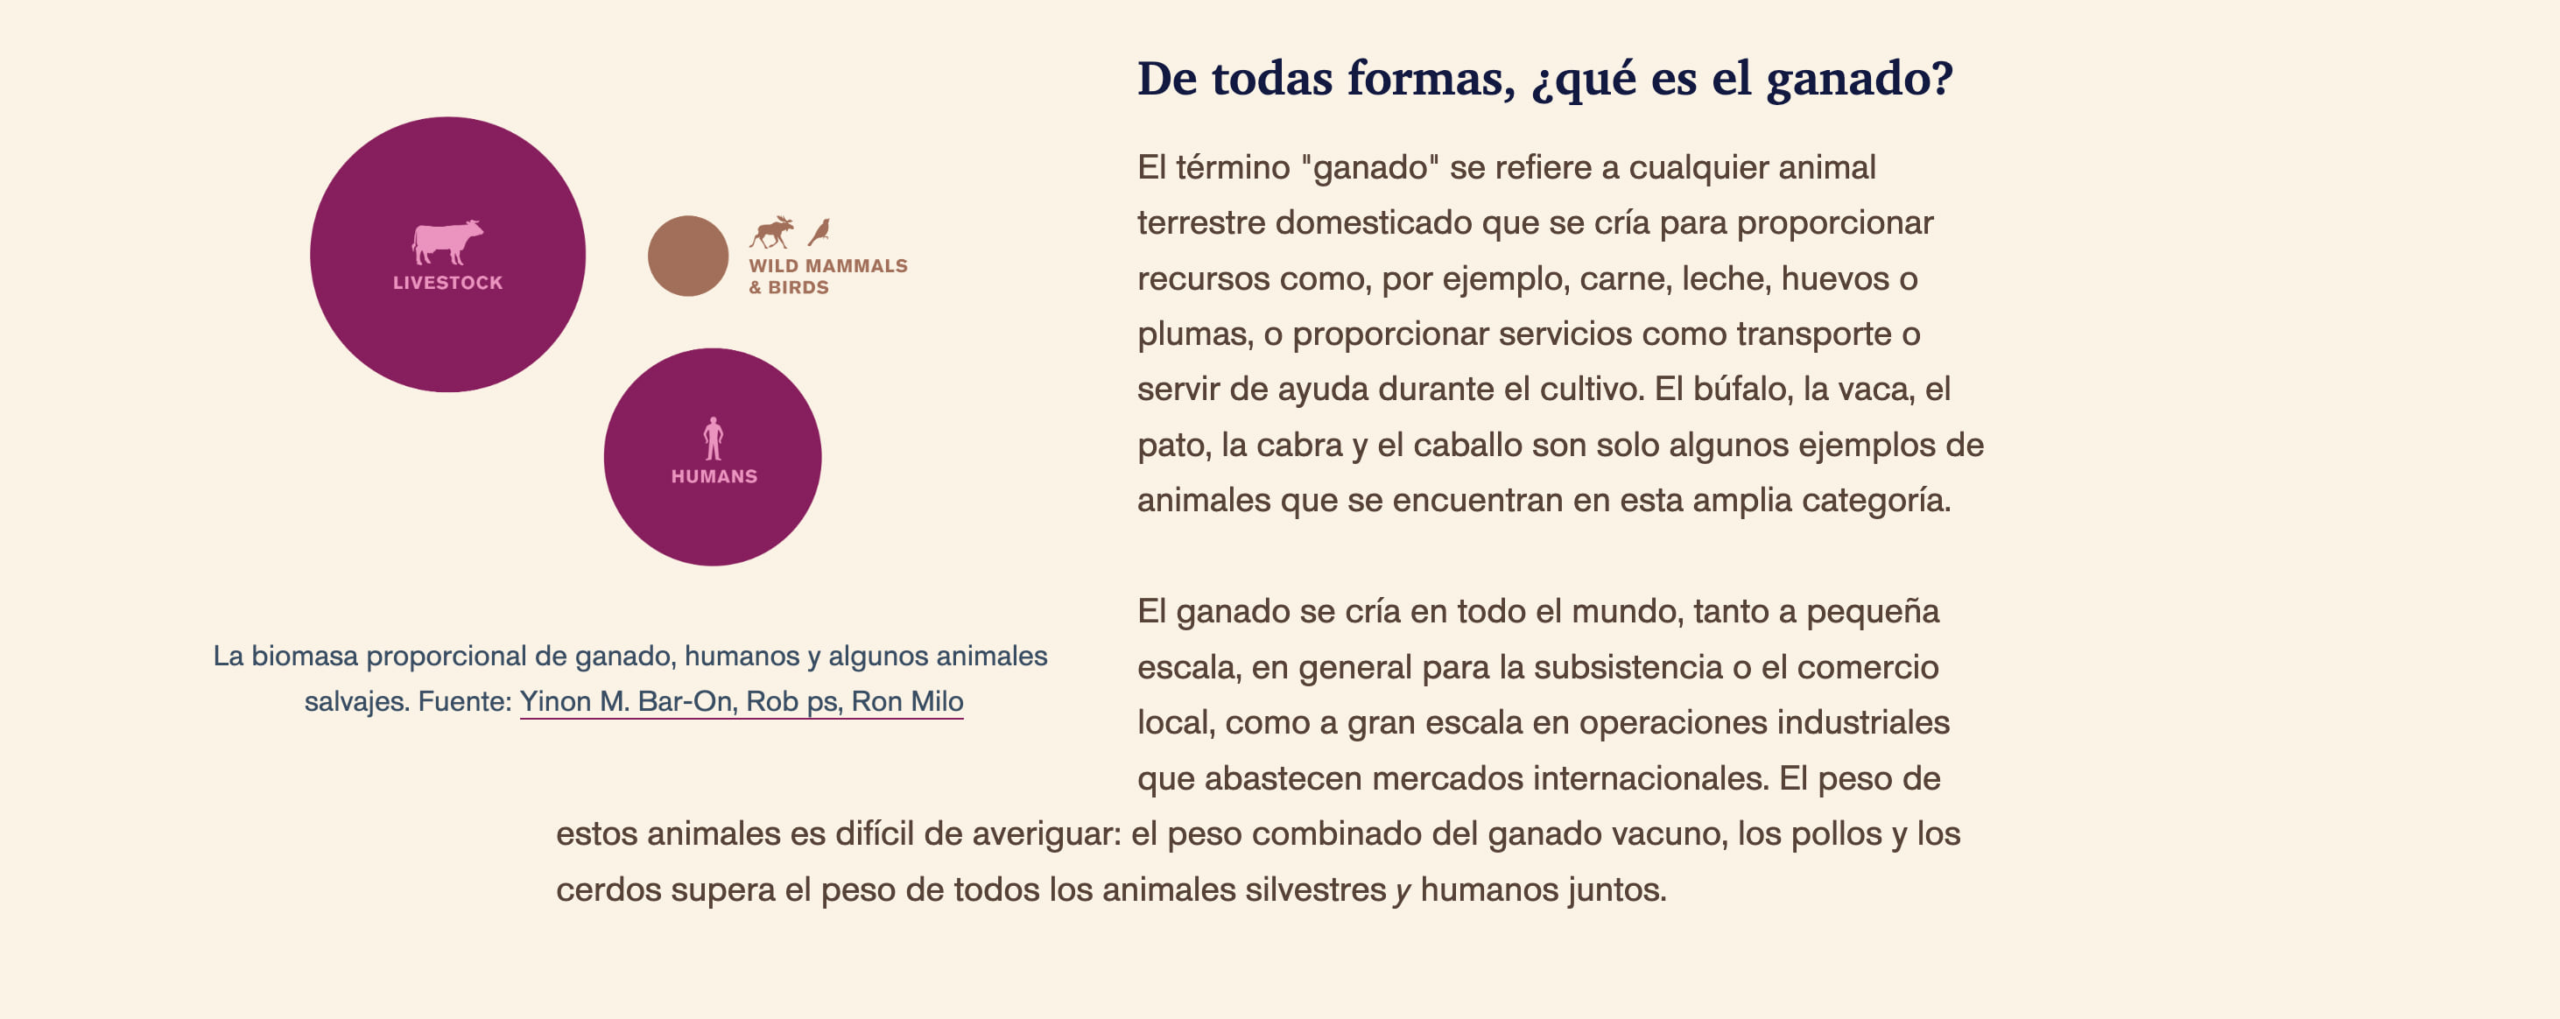 A screenshot from the Spanish-translated version of the Farm (Animal) Planet story, including an infographic depicting share of biomass owned by livestock, humans, and wild animals